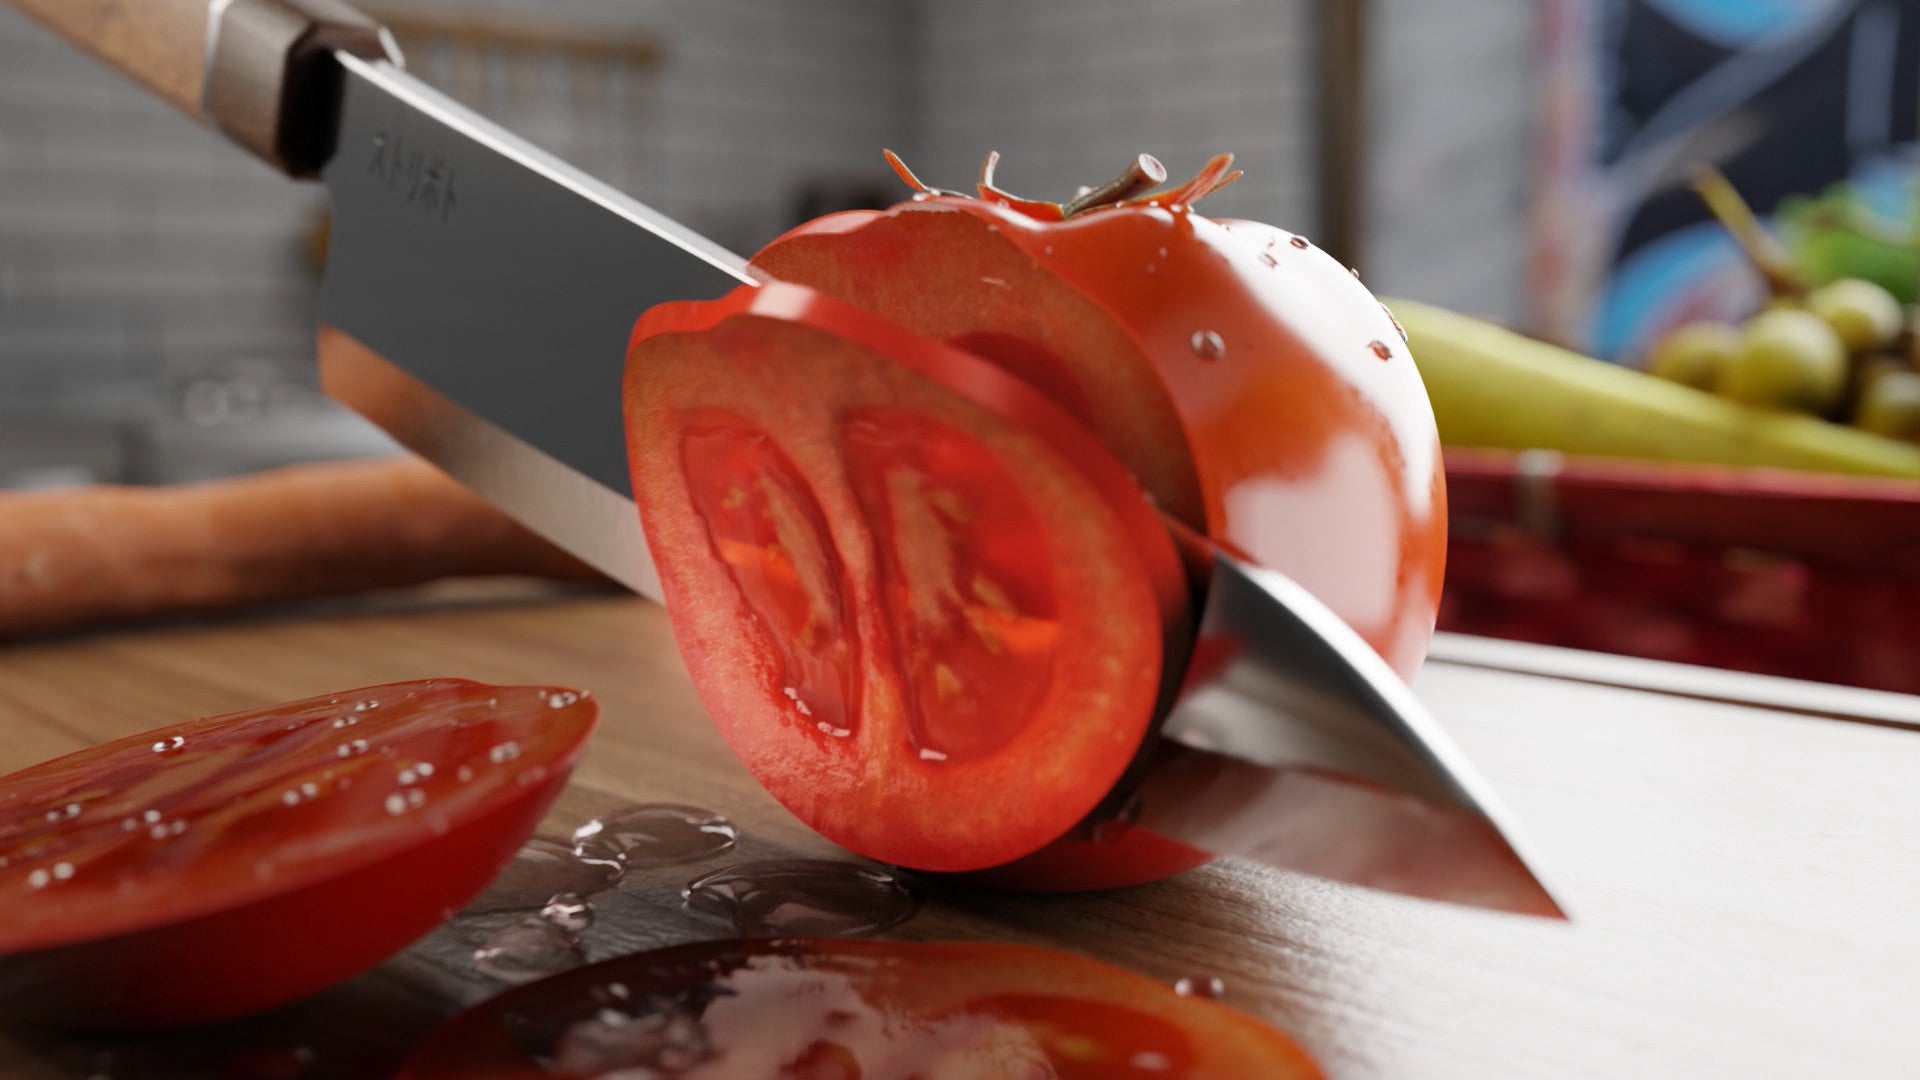 Slicing a tomato in an ASMR Food Experience screenshot.